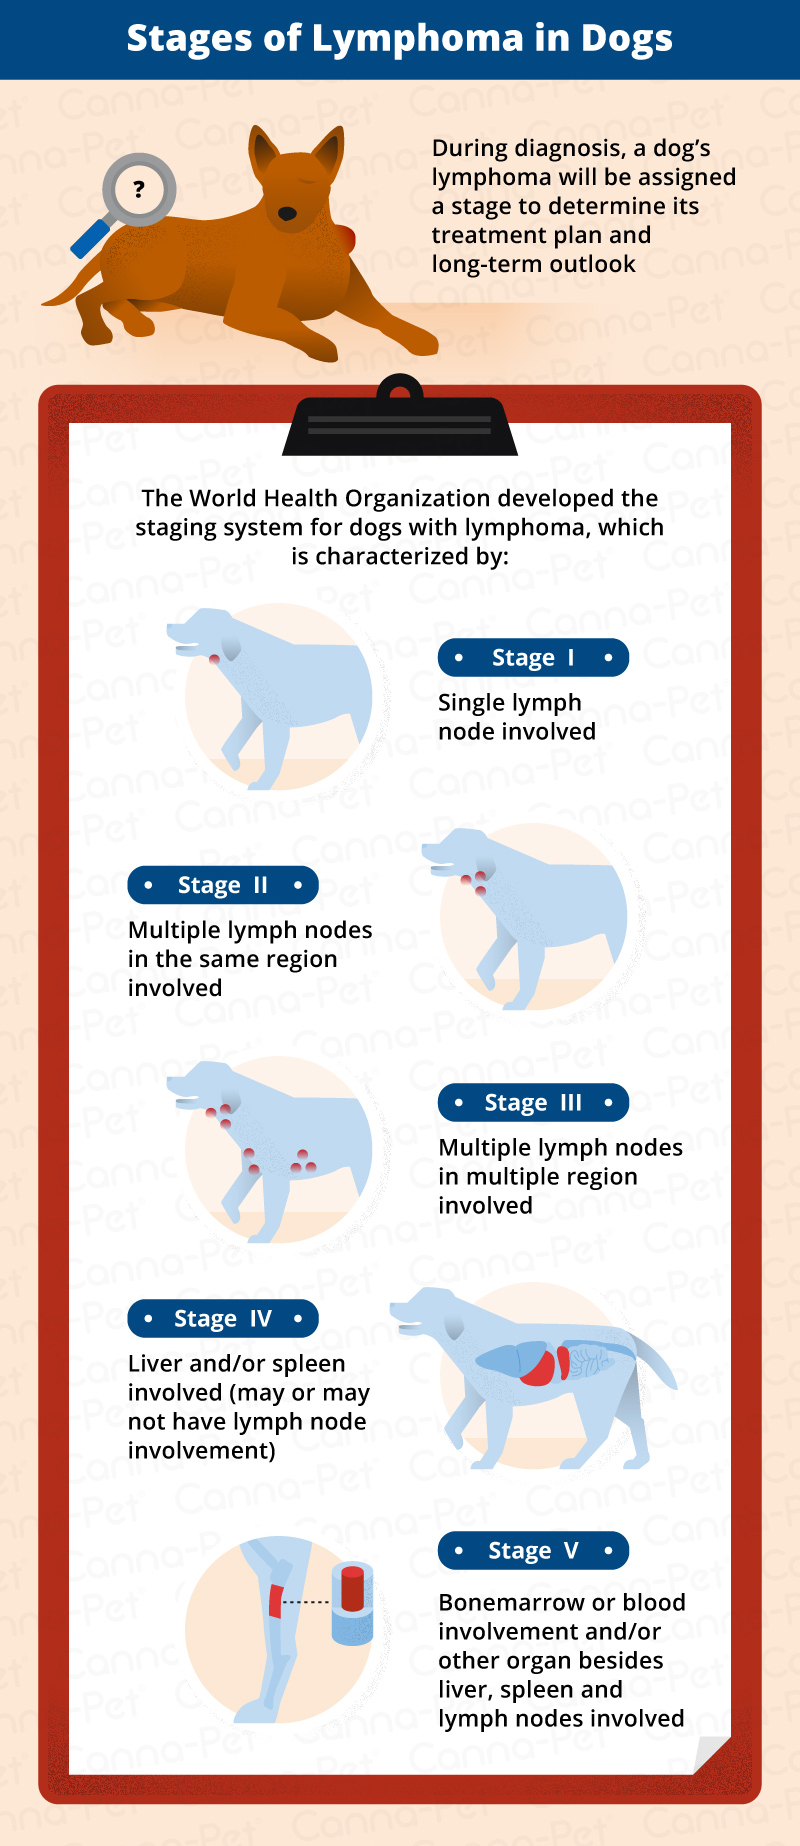 Stages of Lymphoma in Dogs